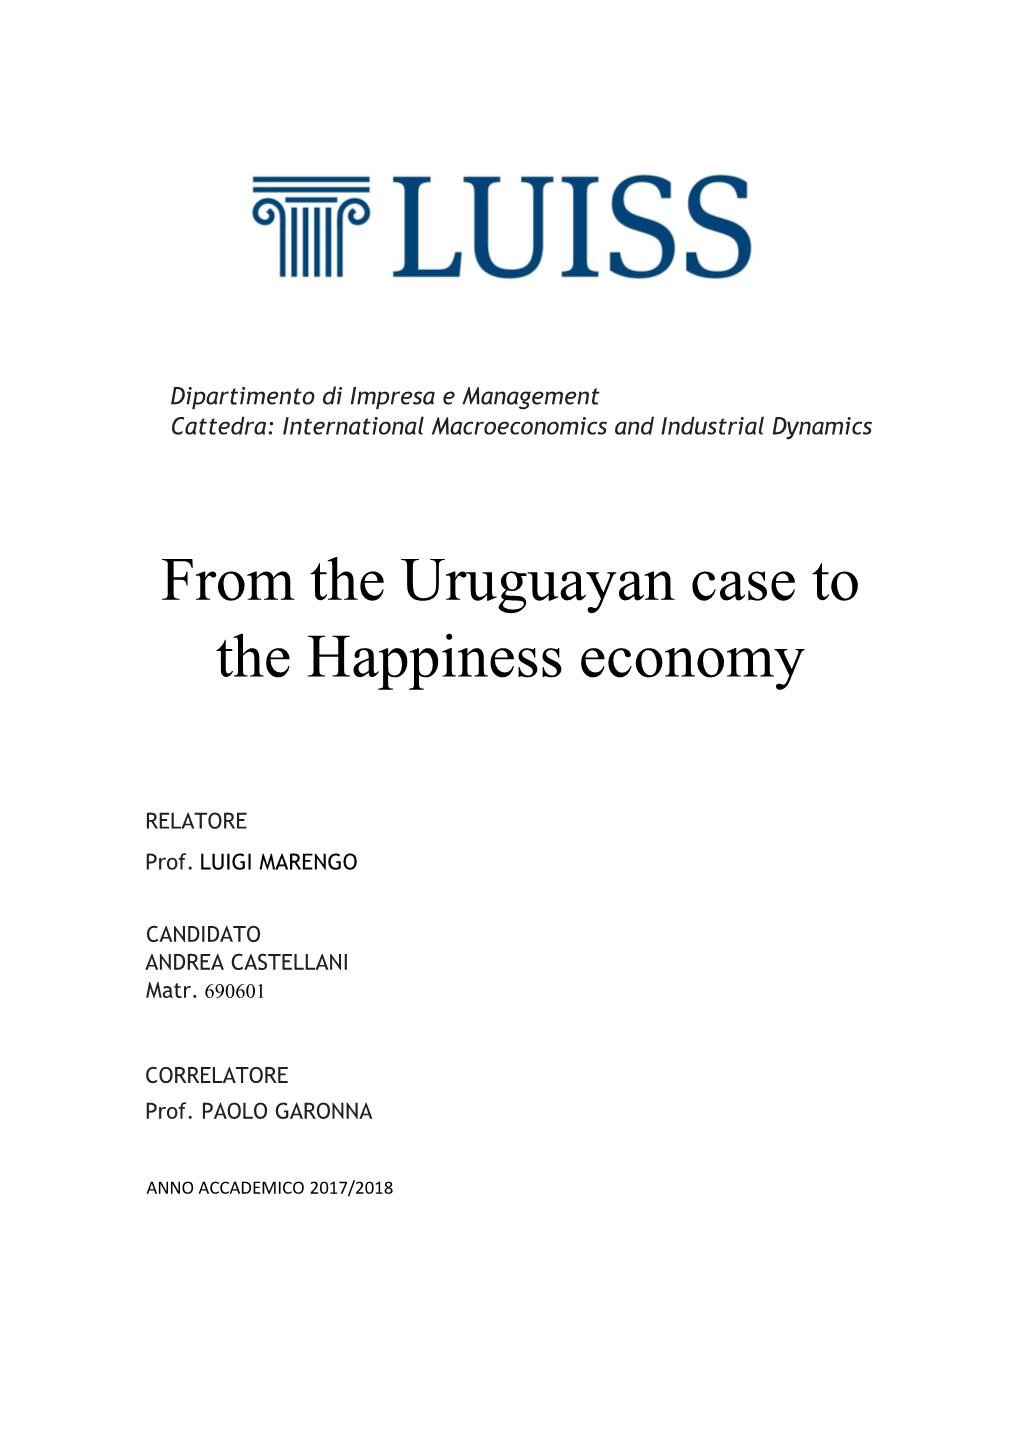 From the Uruguayan Case to the Happiness Economy